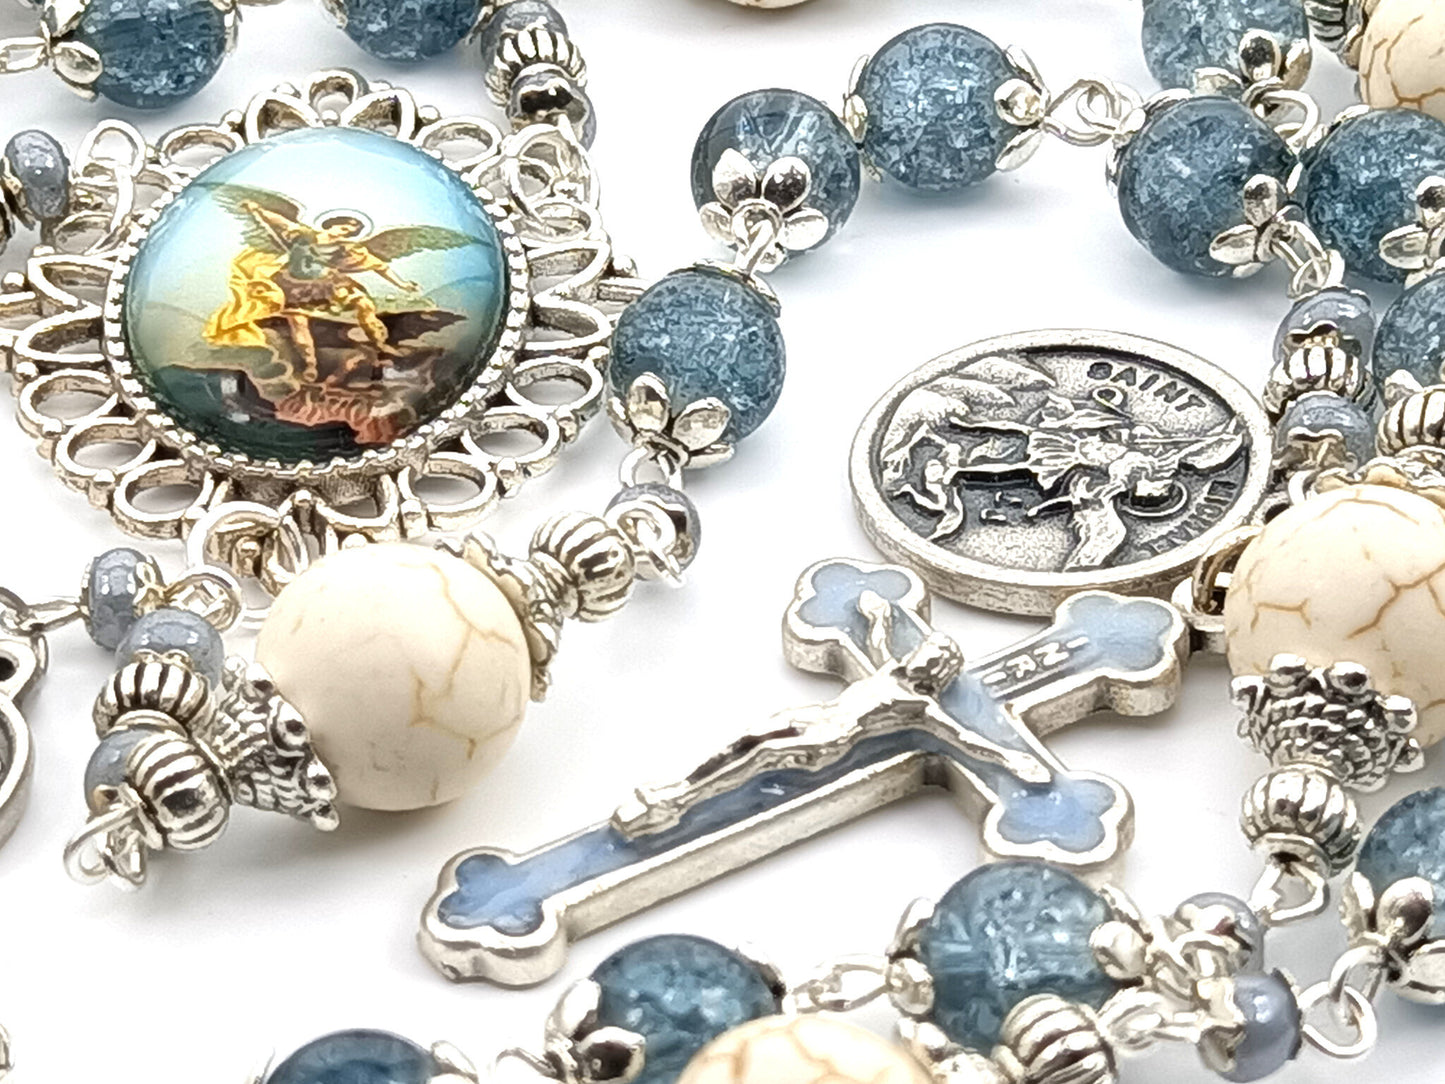 Saint Michael unique rosary beads prayer chaplet with blue glass and cream gemstone beads, silver and blue enamel crucifix, Saint Michael picture medal and silver bead caps.